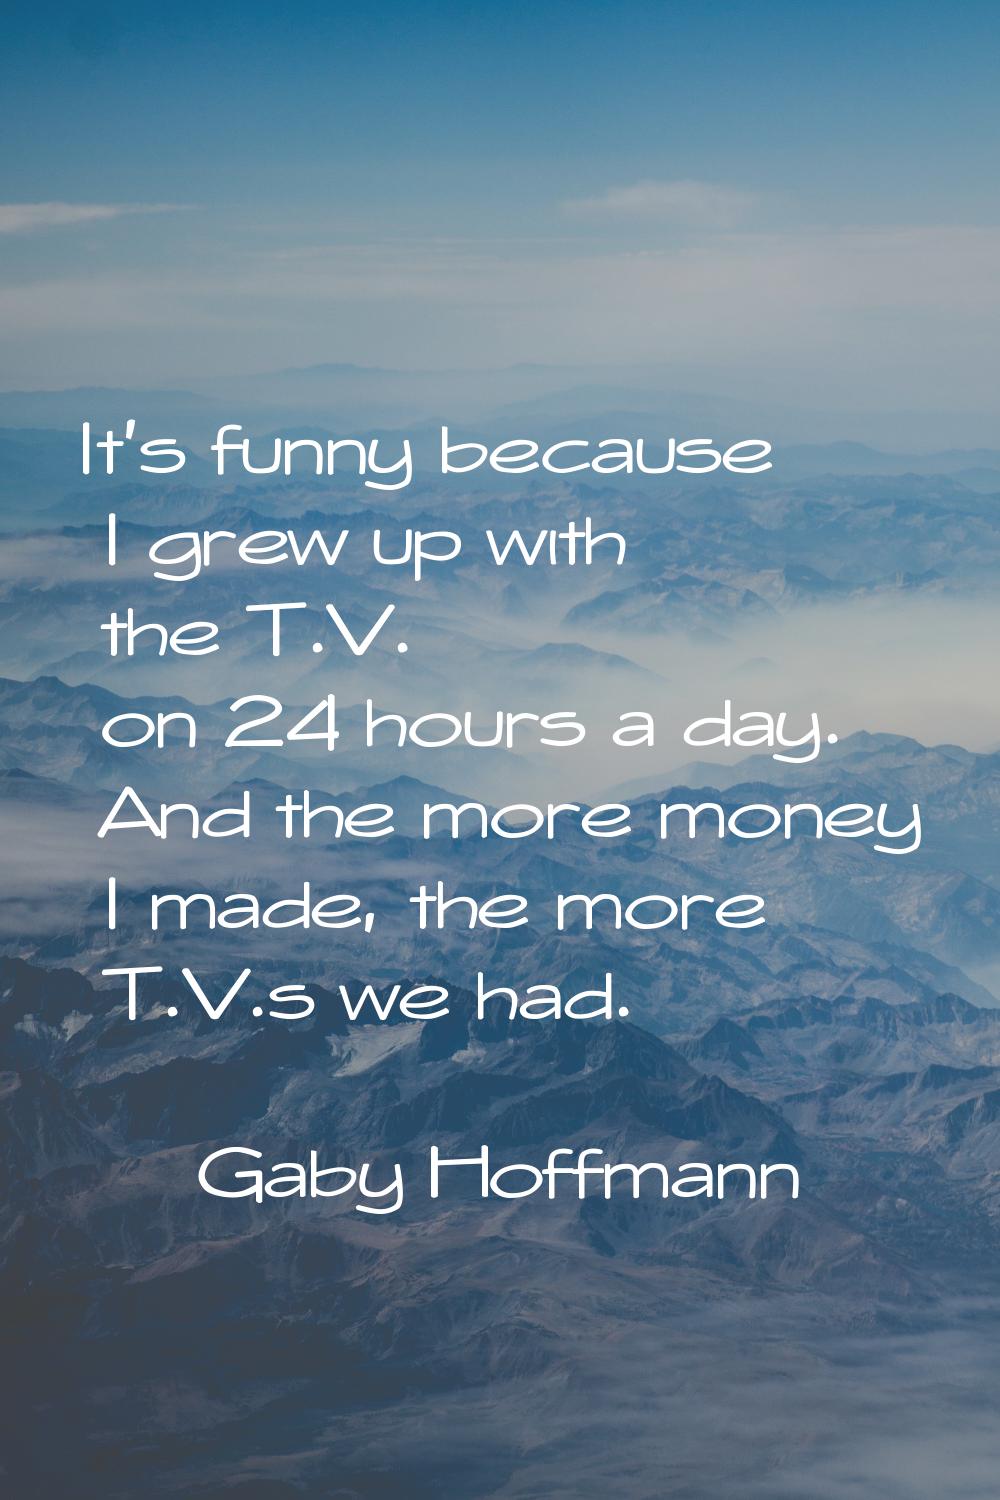 It's funny because I grew up with the T.V. on 24 hours a day. And the more money I made, the more T